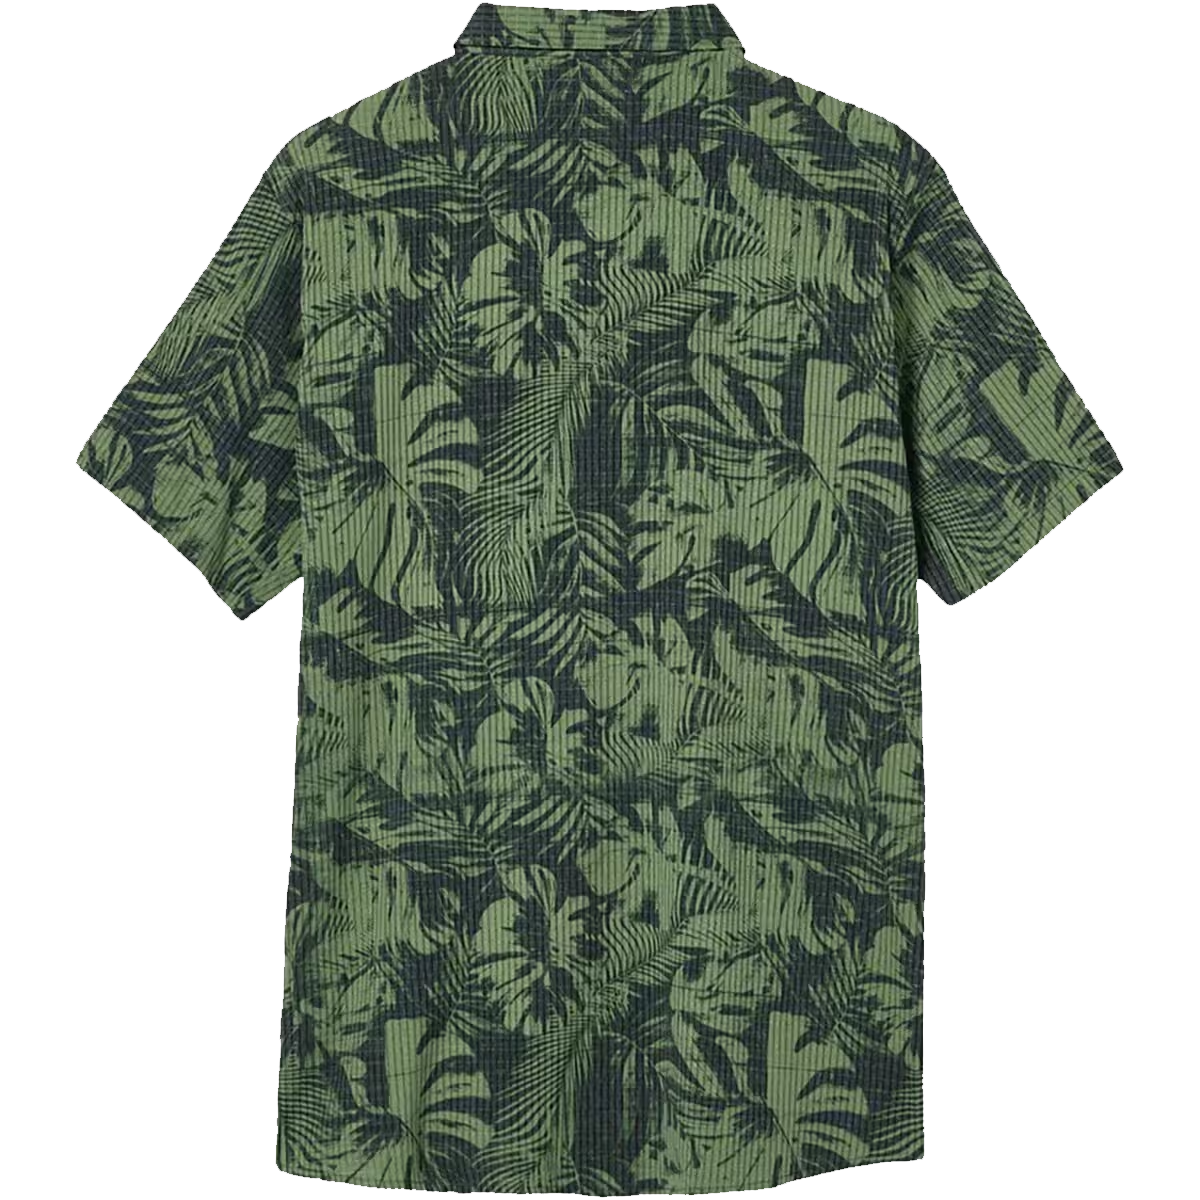 Men's Bless Up Short Sleeve Breathable Stretch Shirt alternate view